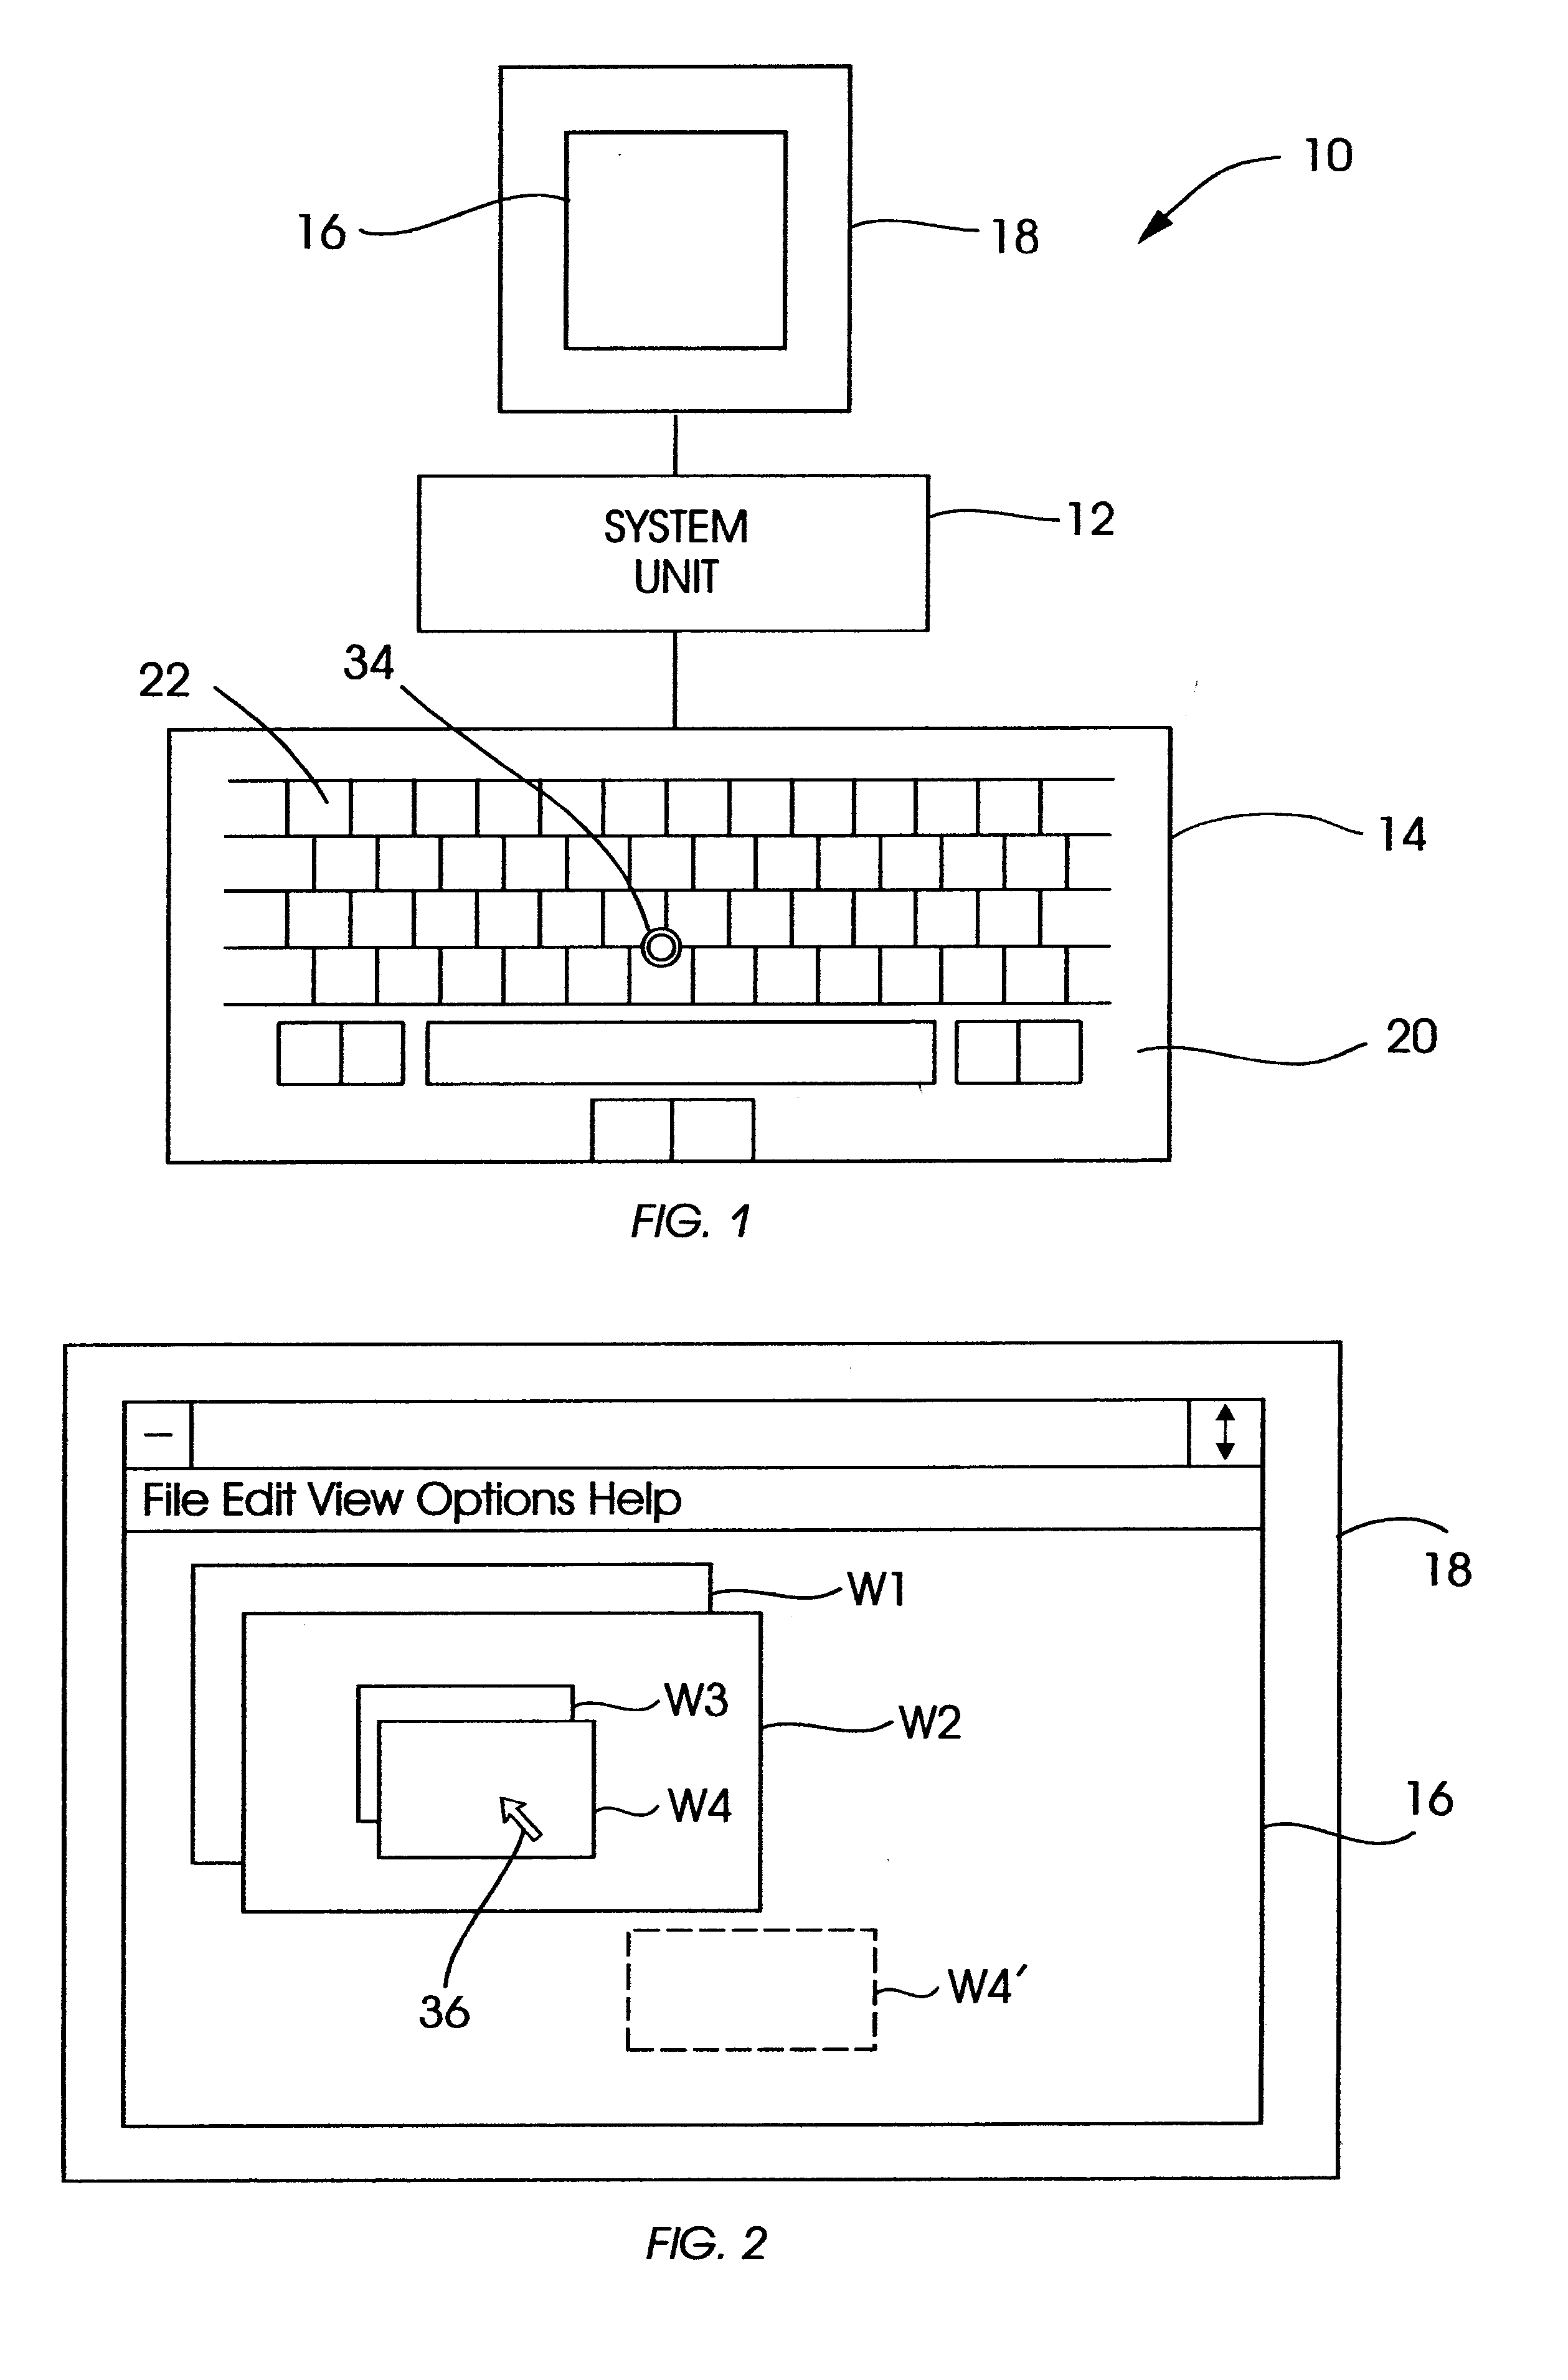 Integrated pointing device having tactile feedback